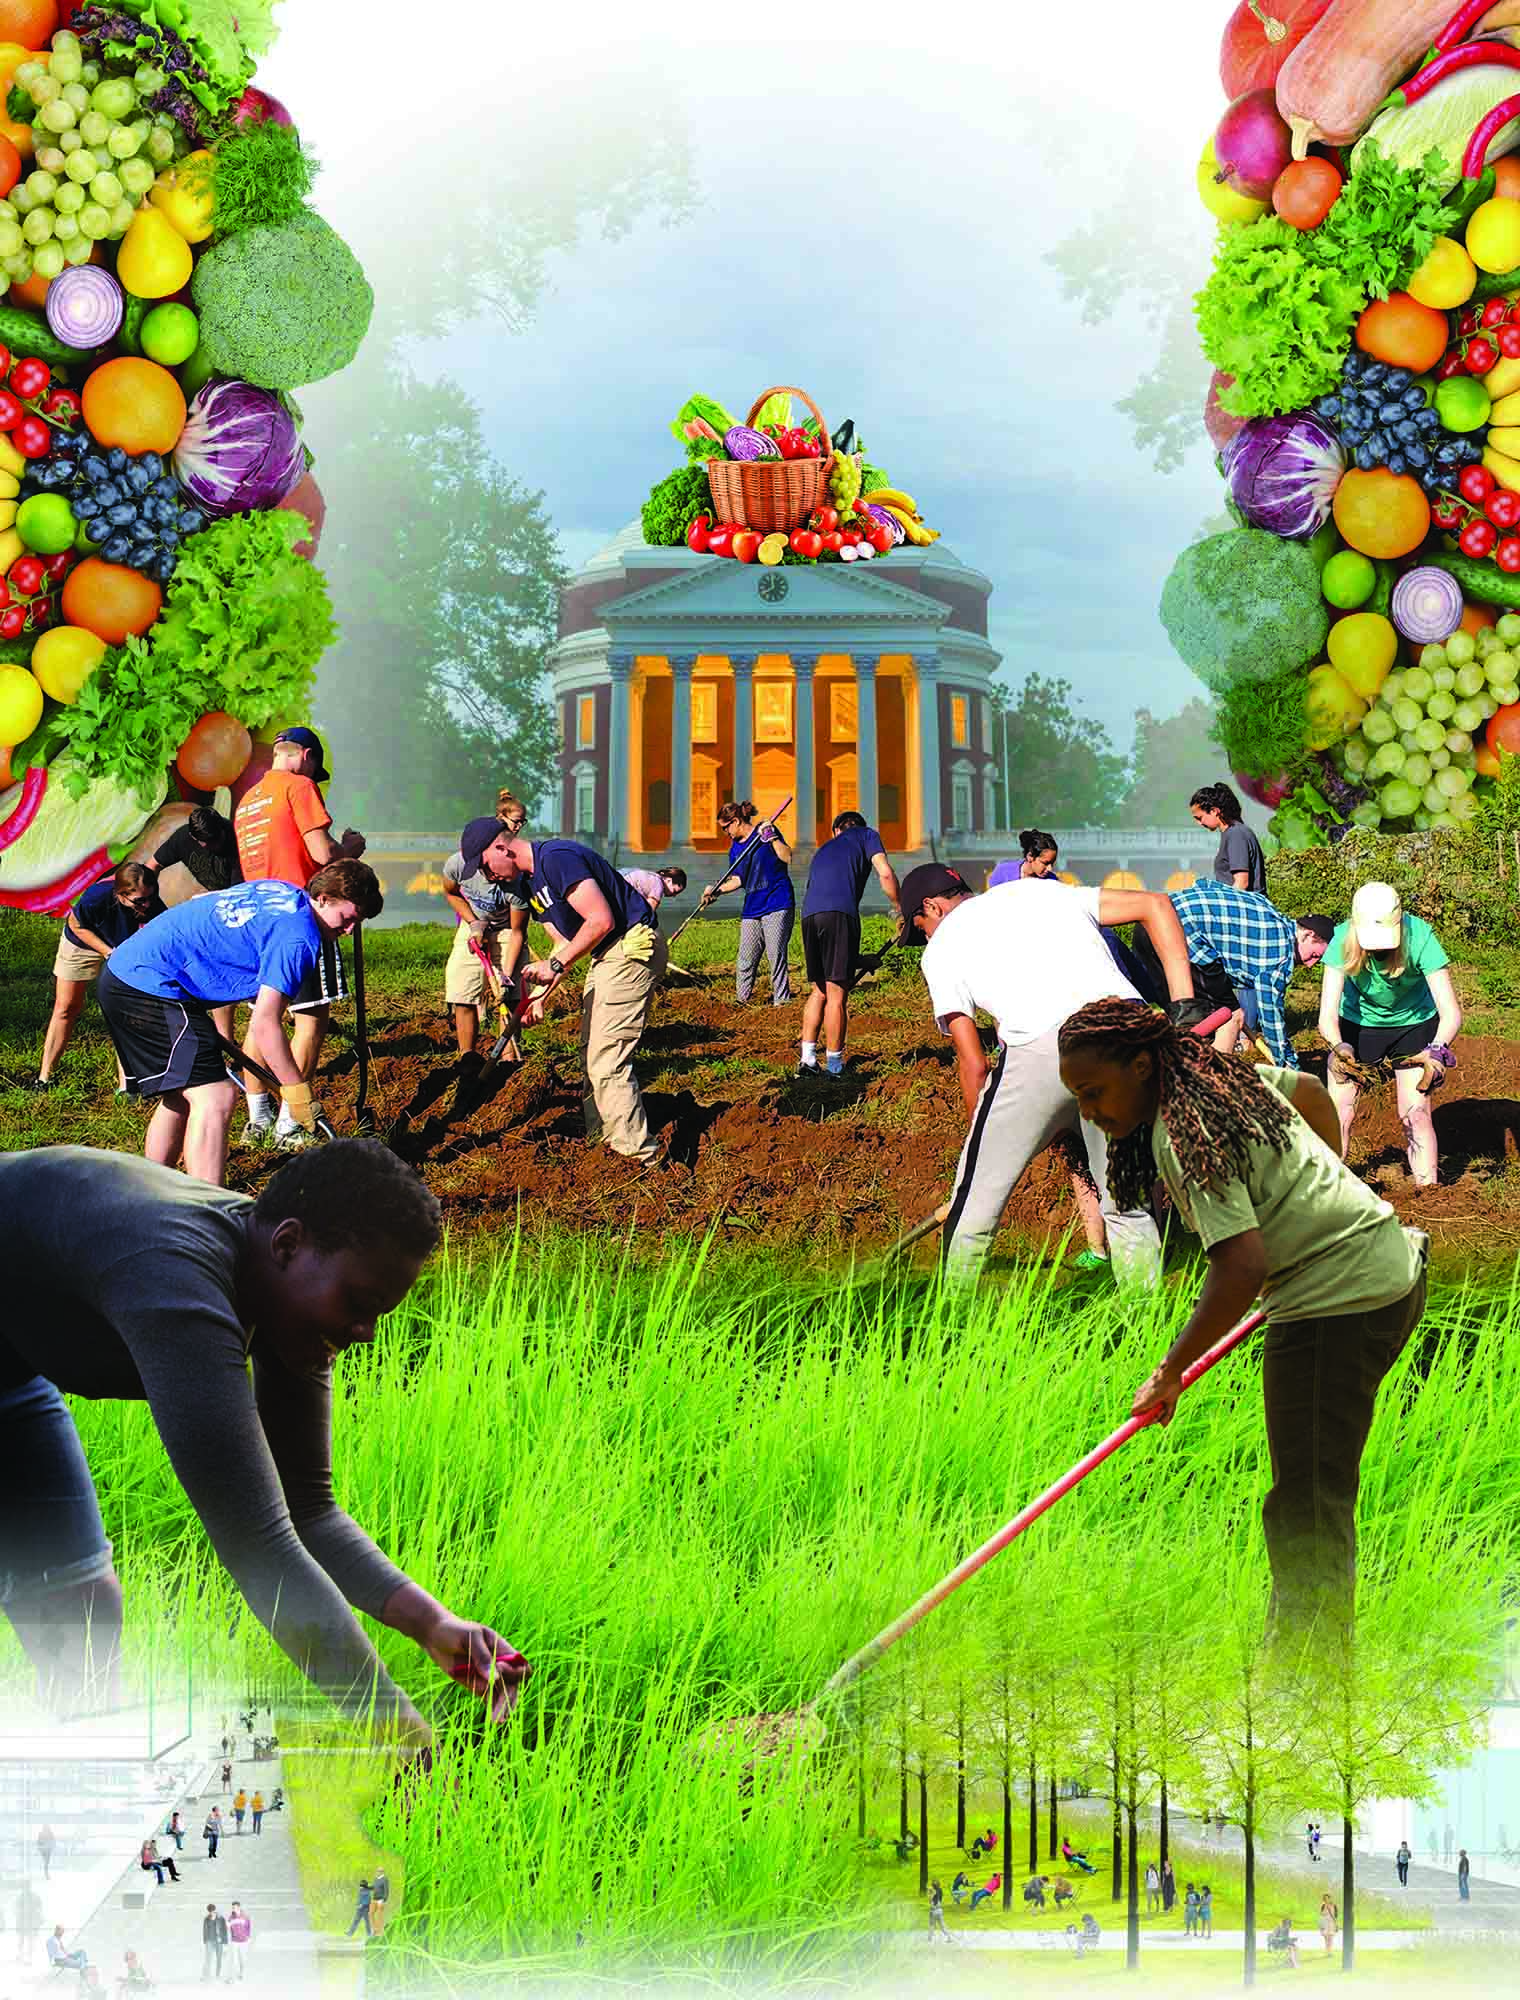 People hoeing the ground to plant vegetables with fruit images on top of the Rotunda